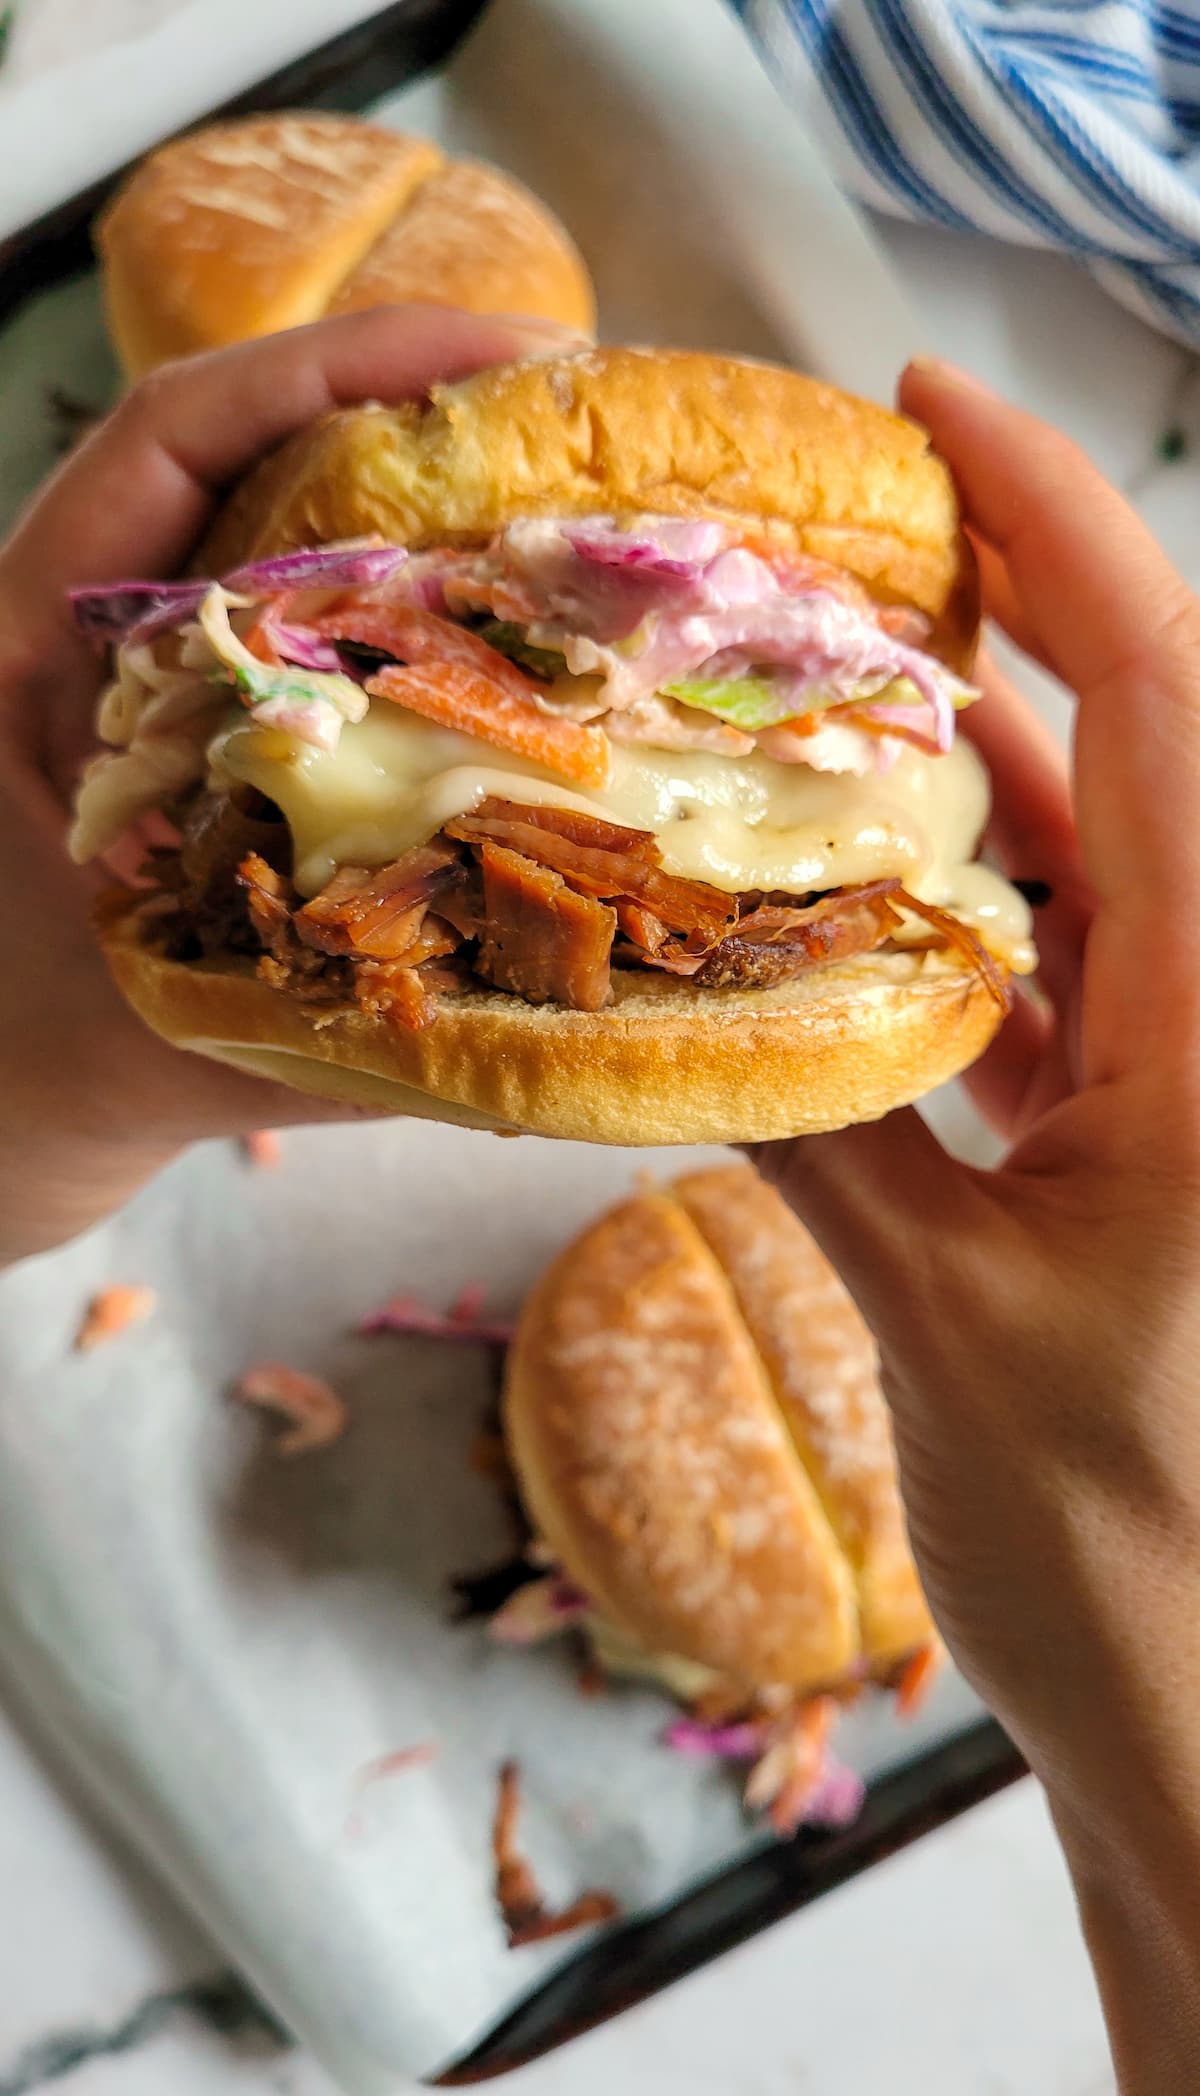 hand holding a sandwich with brisket of beef, cheese and coleslaw over a tray with more